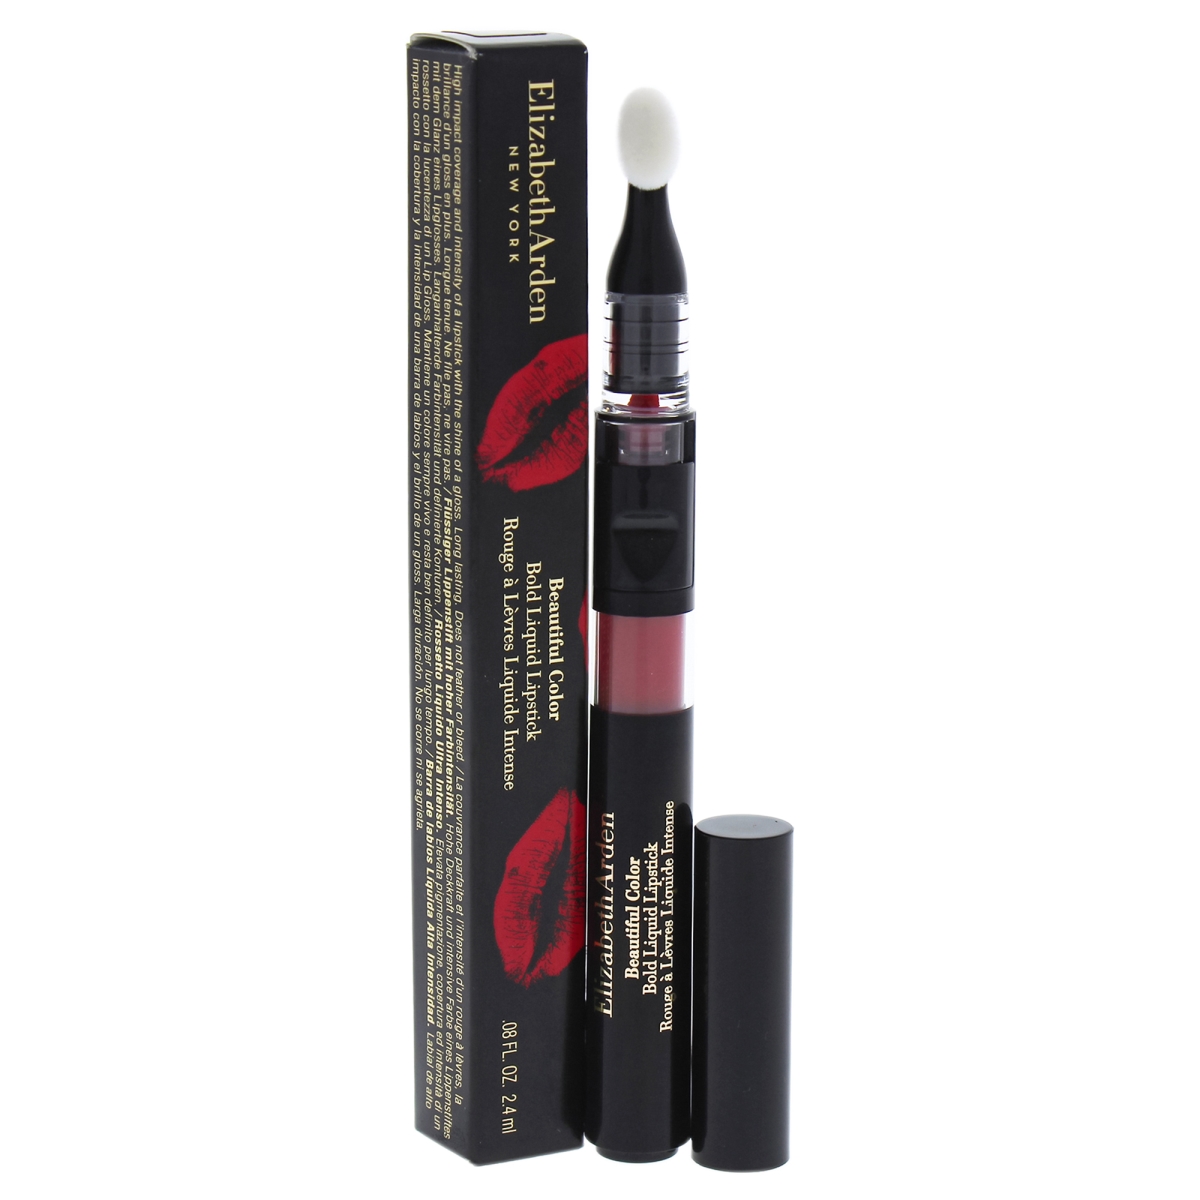 I0087458 0.08 Oz Beautiful Color Bold Liquid Lipstick For Womens - 06 Fiery Red